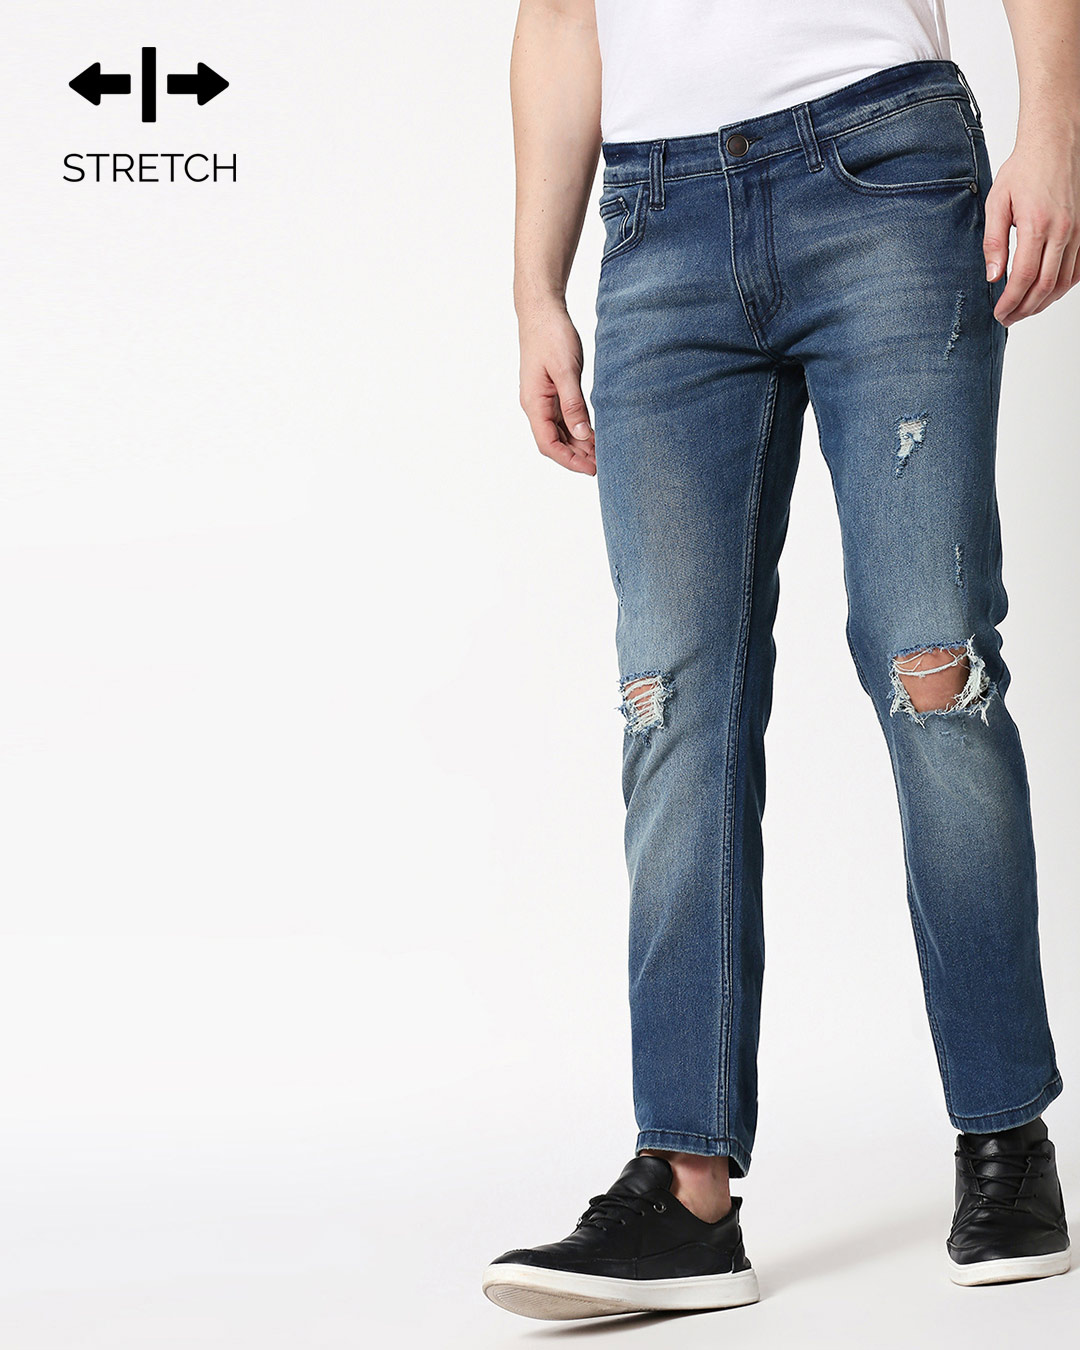 Buy > mid rise jeans mens > in stock